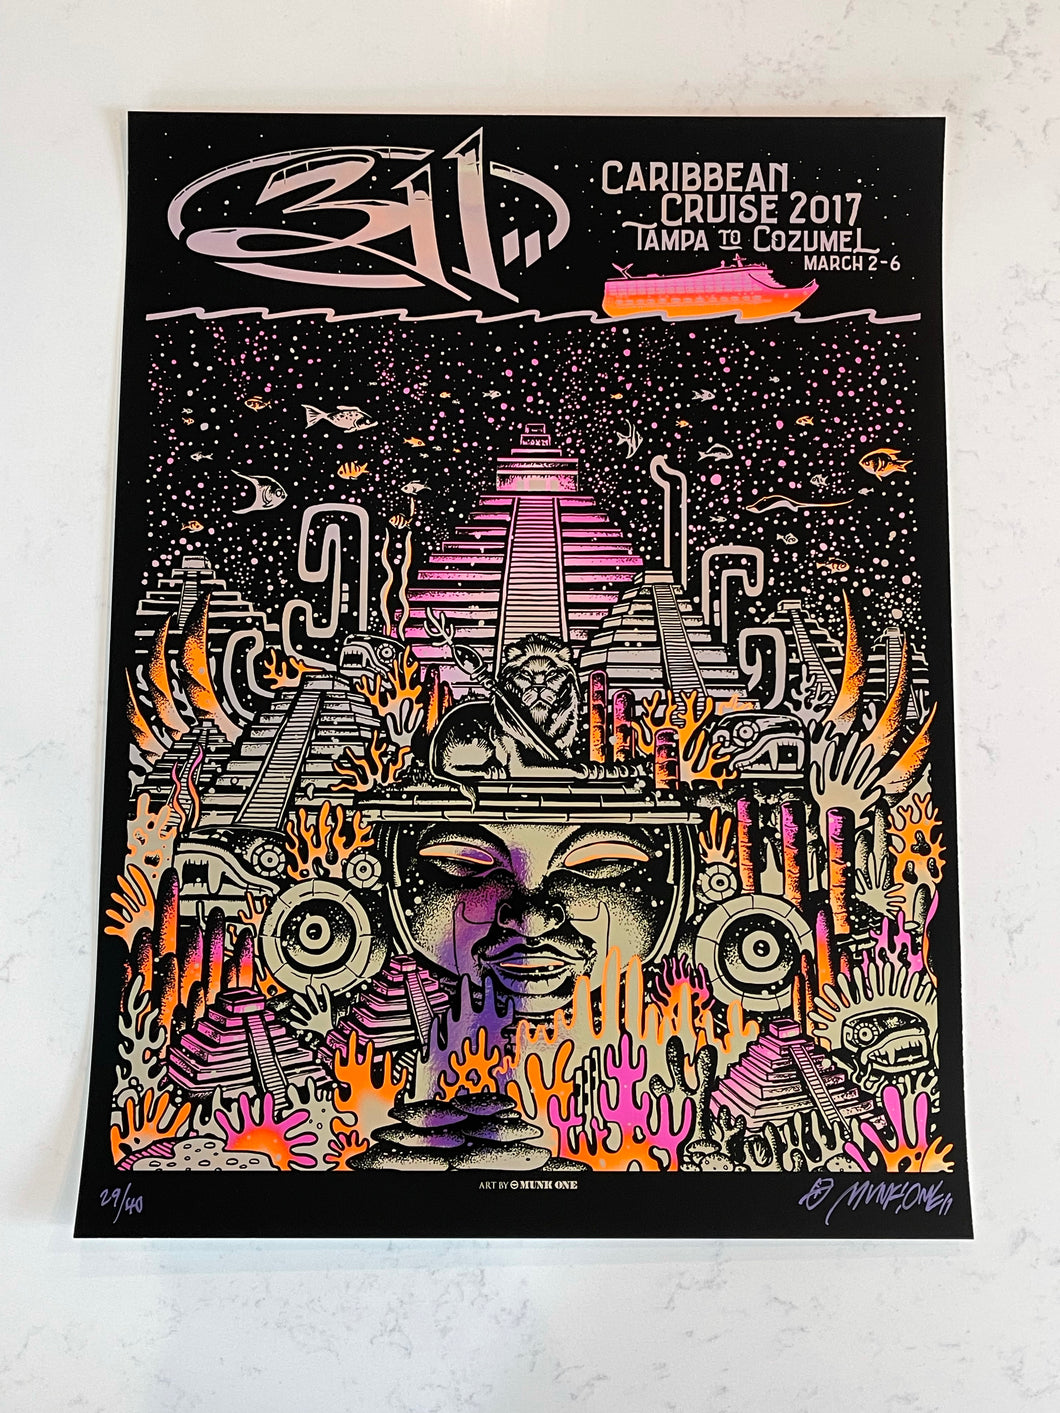 311, 2017 Cruise Iridescent AP by Munk One